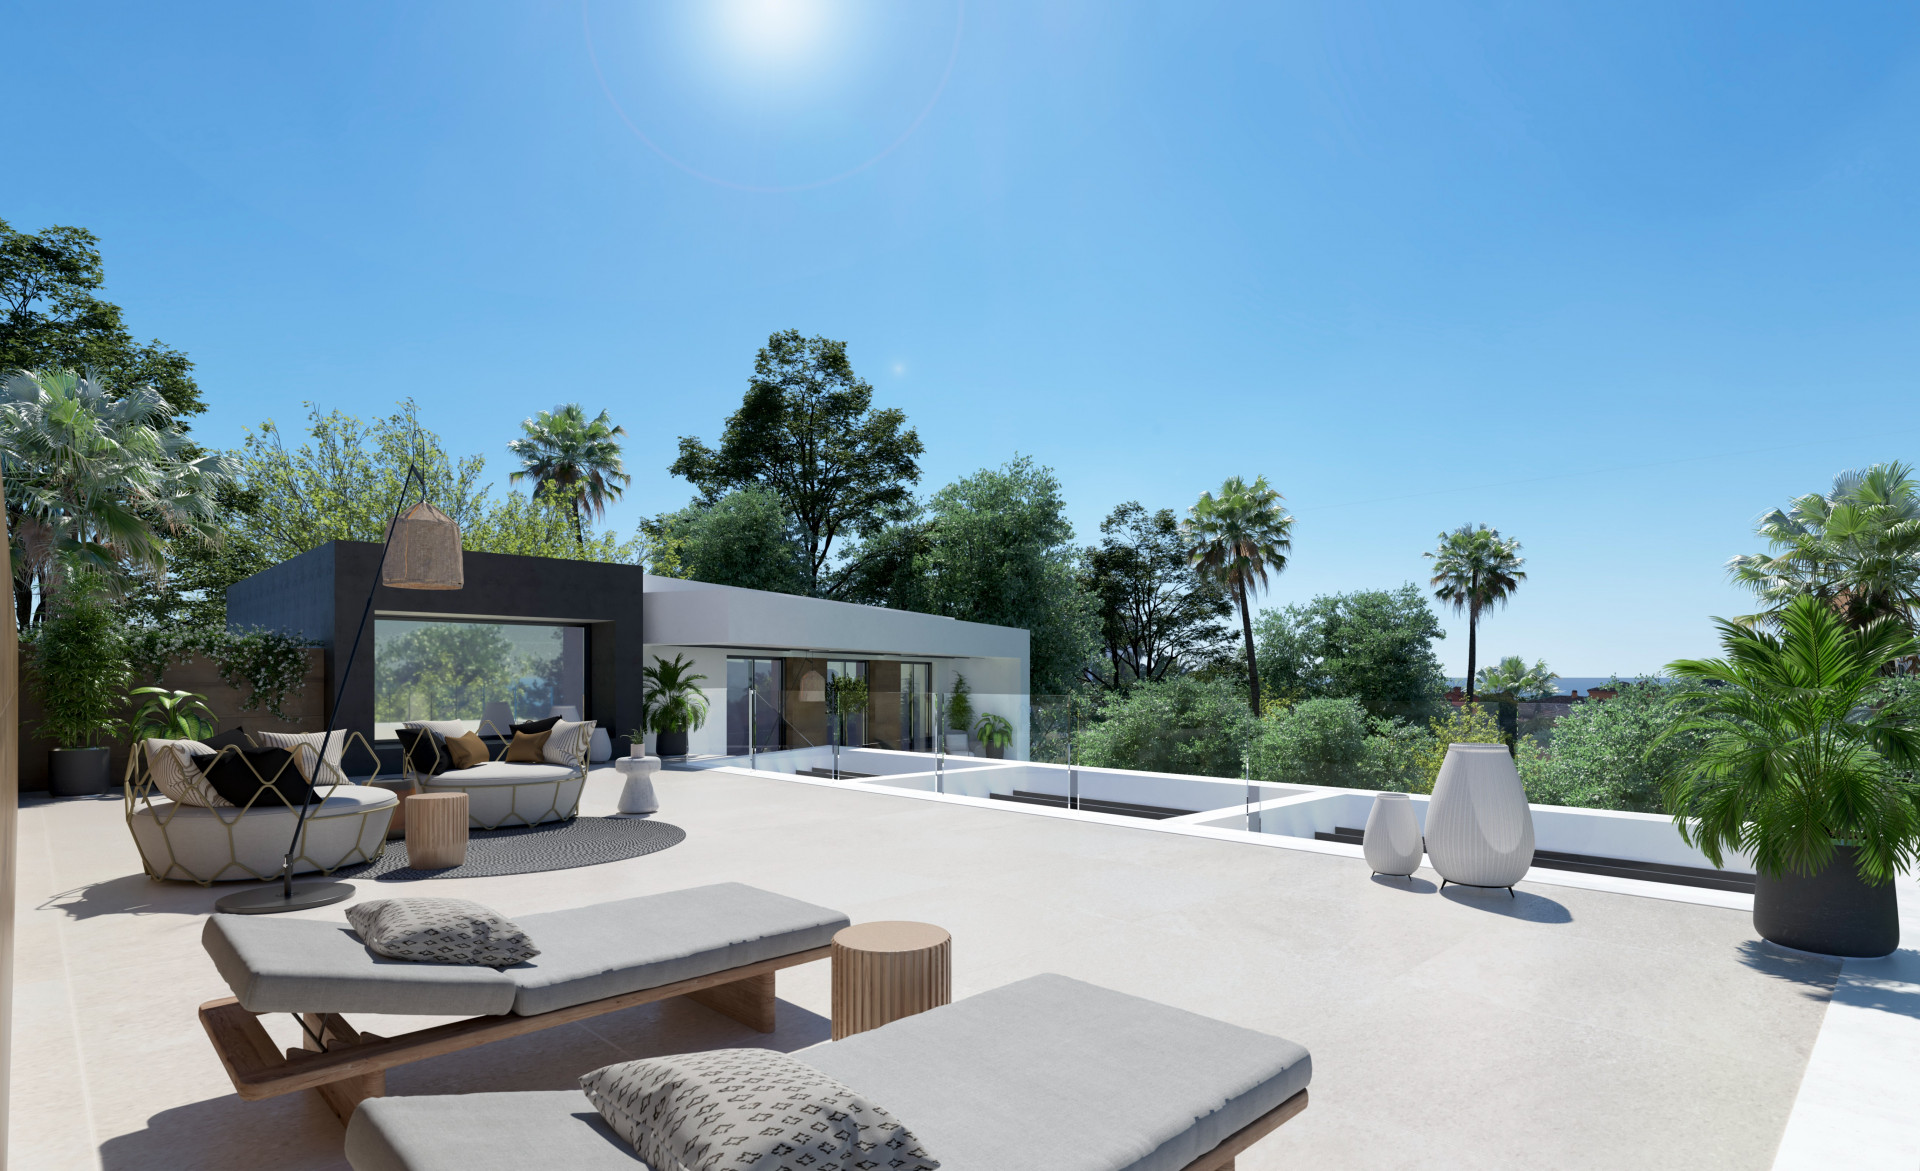 Exclusive off-plan villa in a prime location within walking distance to the Guadalmina Hotel and the beach